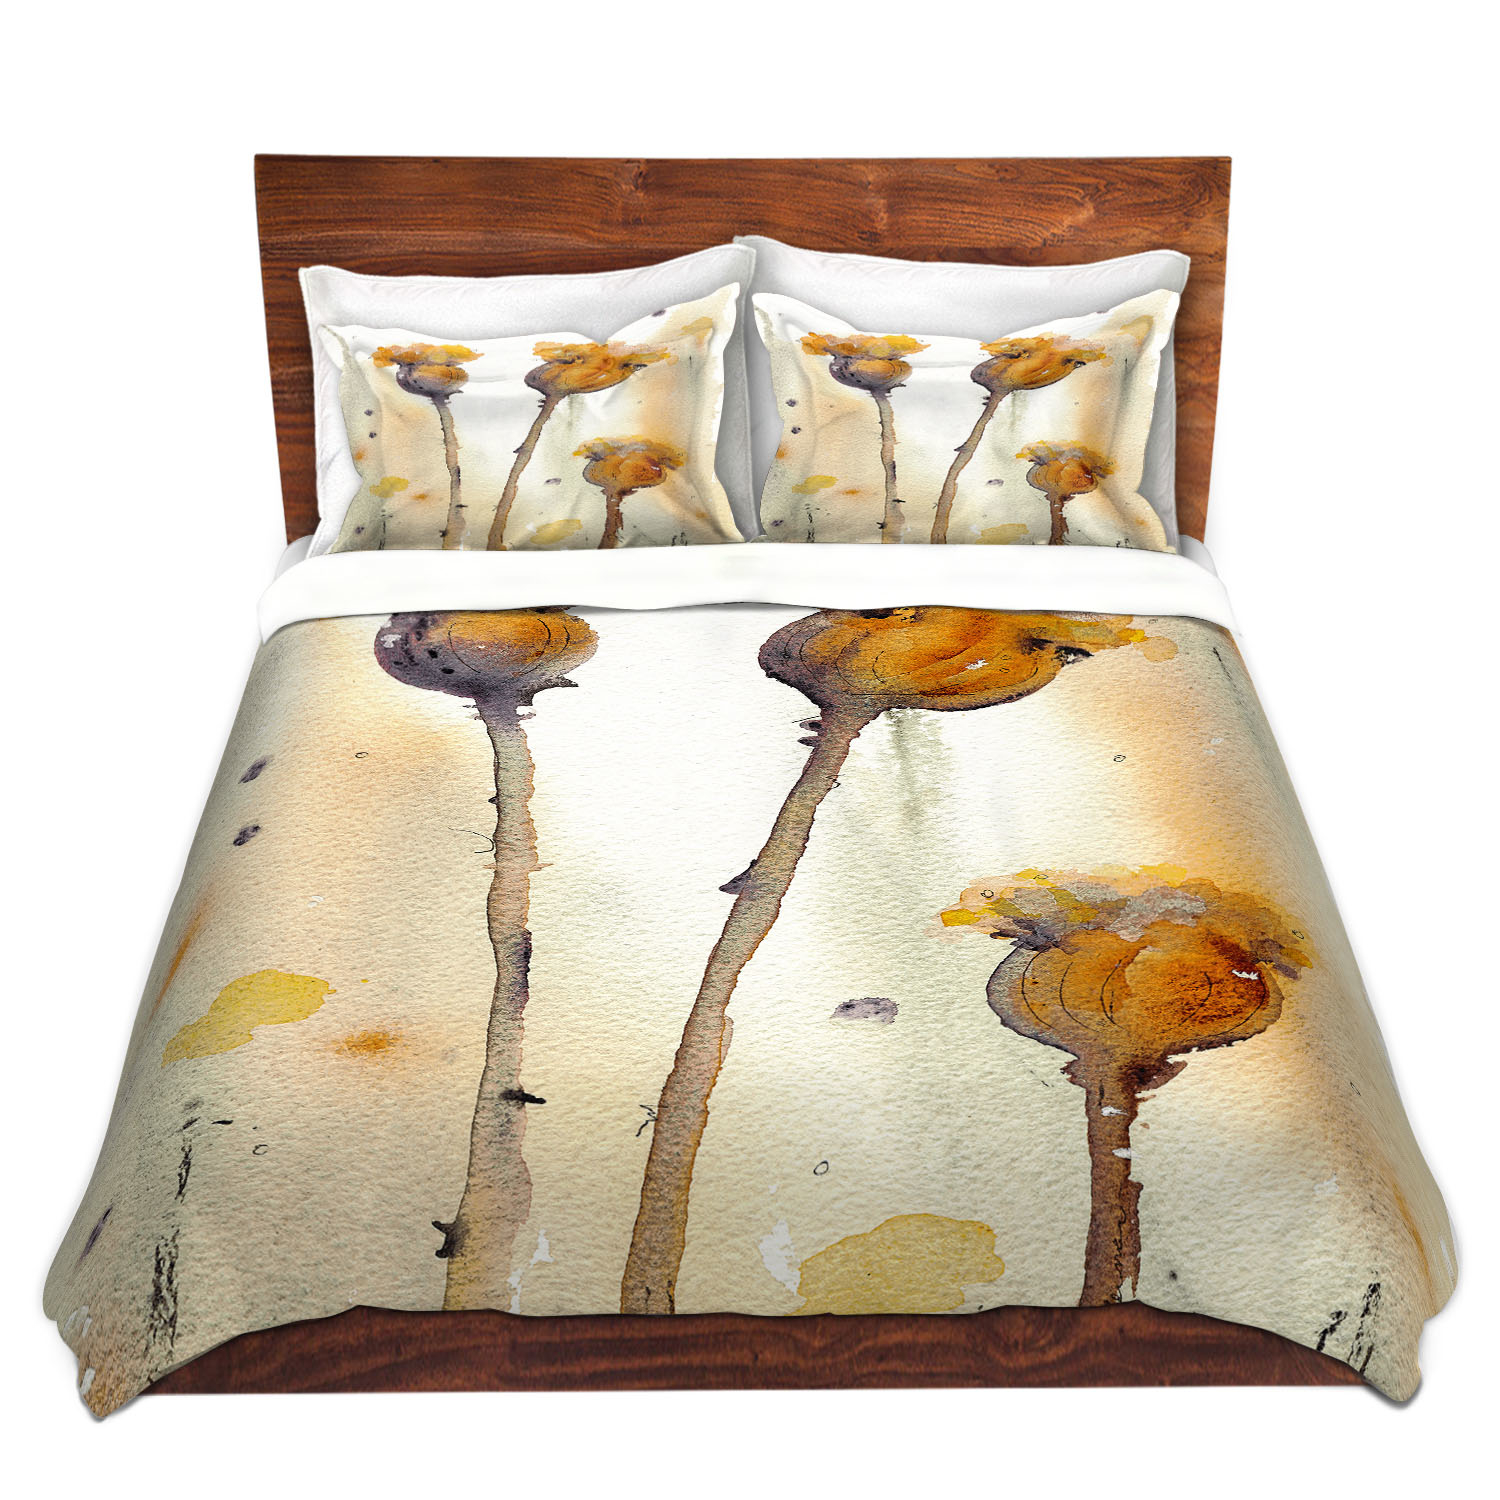 Dianoche Microfiber Duvet Covers By Dawn Derman - Gone To Seed